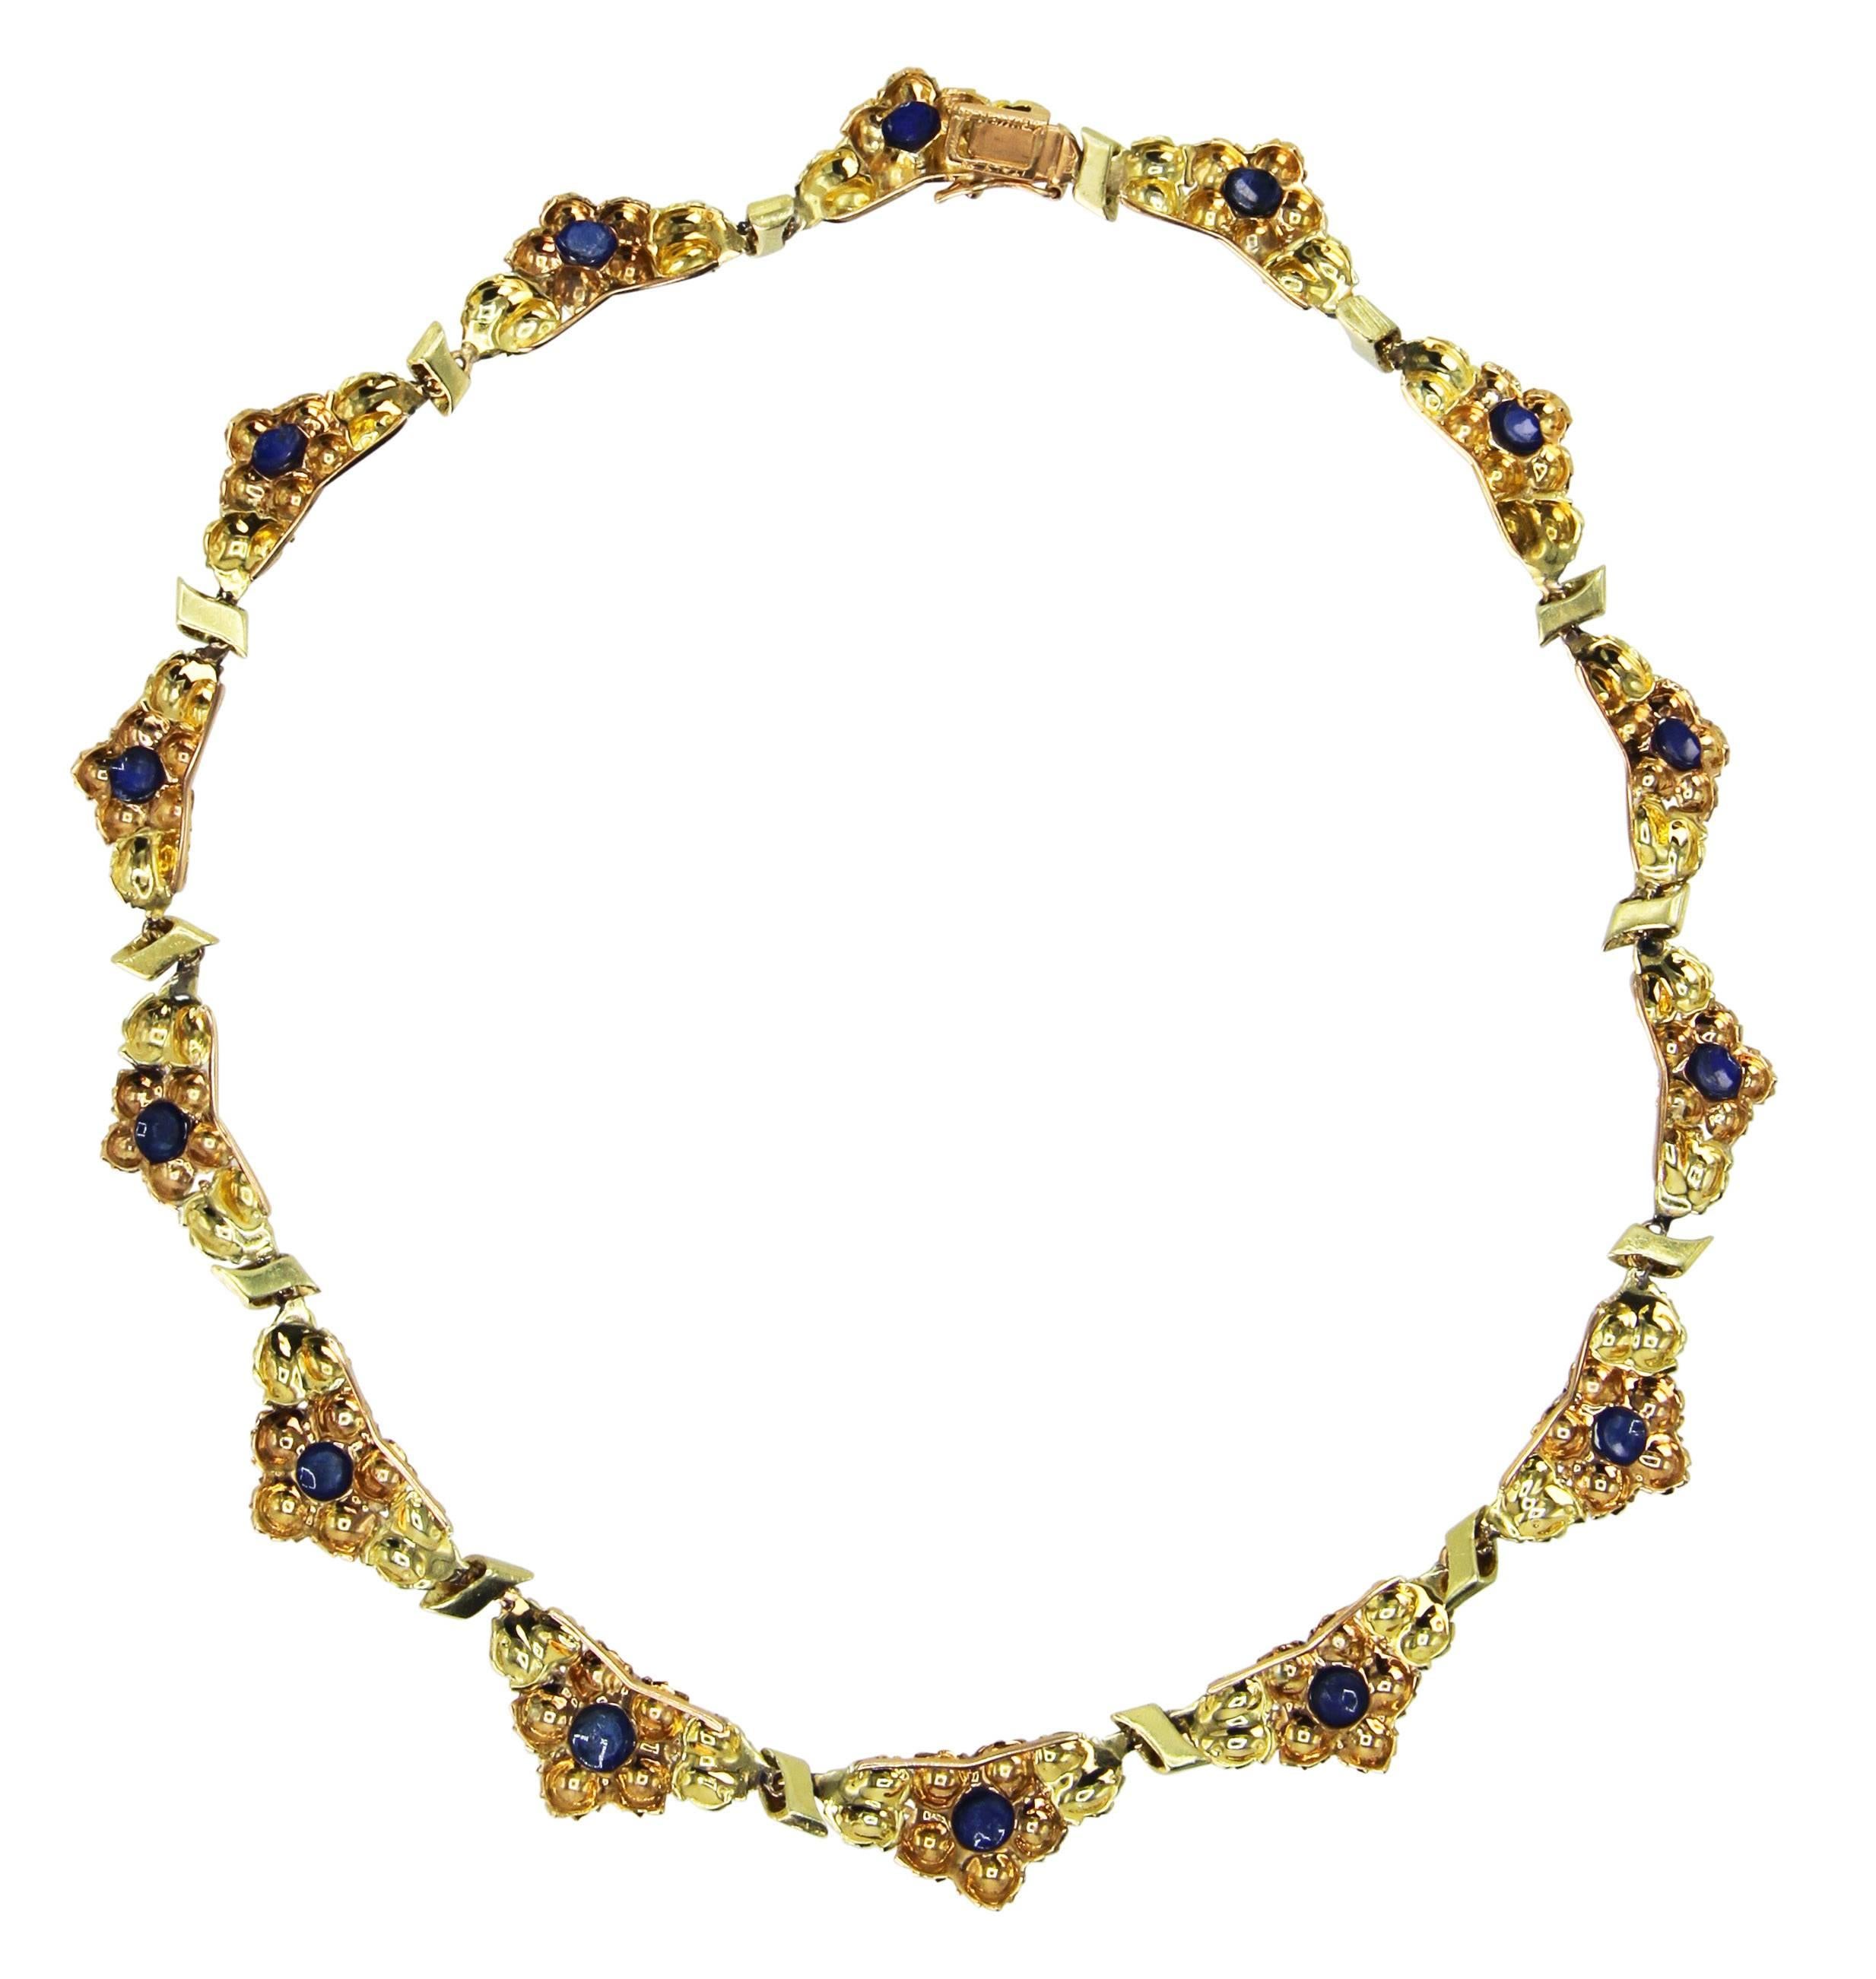 18 Karat Two-Tone Gold and Sapphire Necklace by Buccellati, Italy, circa 1960
• Signed M. Buccellati, Italy
• 14 cabochon sapphires approximately 7.50 carats
• Gross weight 34.0 grams, length 15 1/4 inches, width 5/8 inch